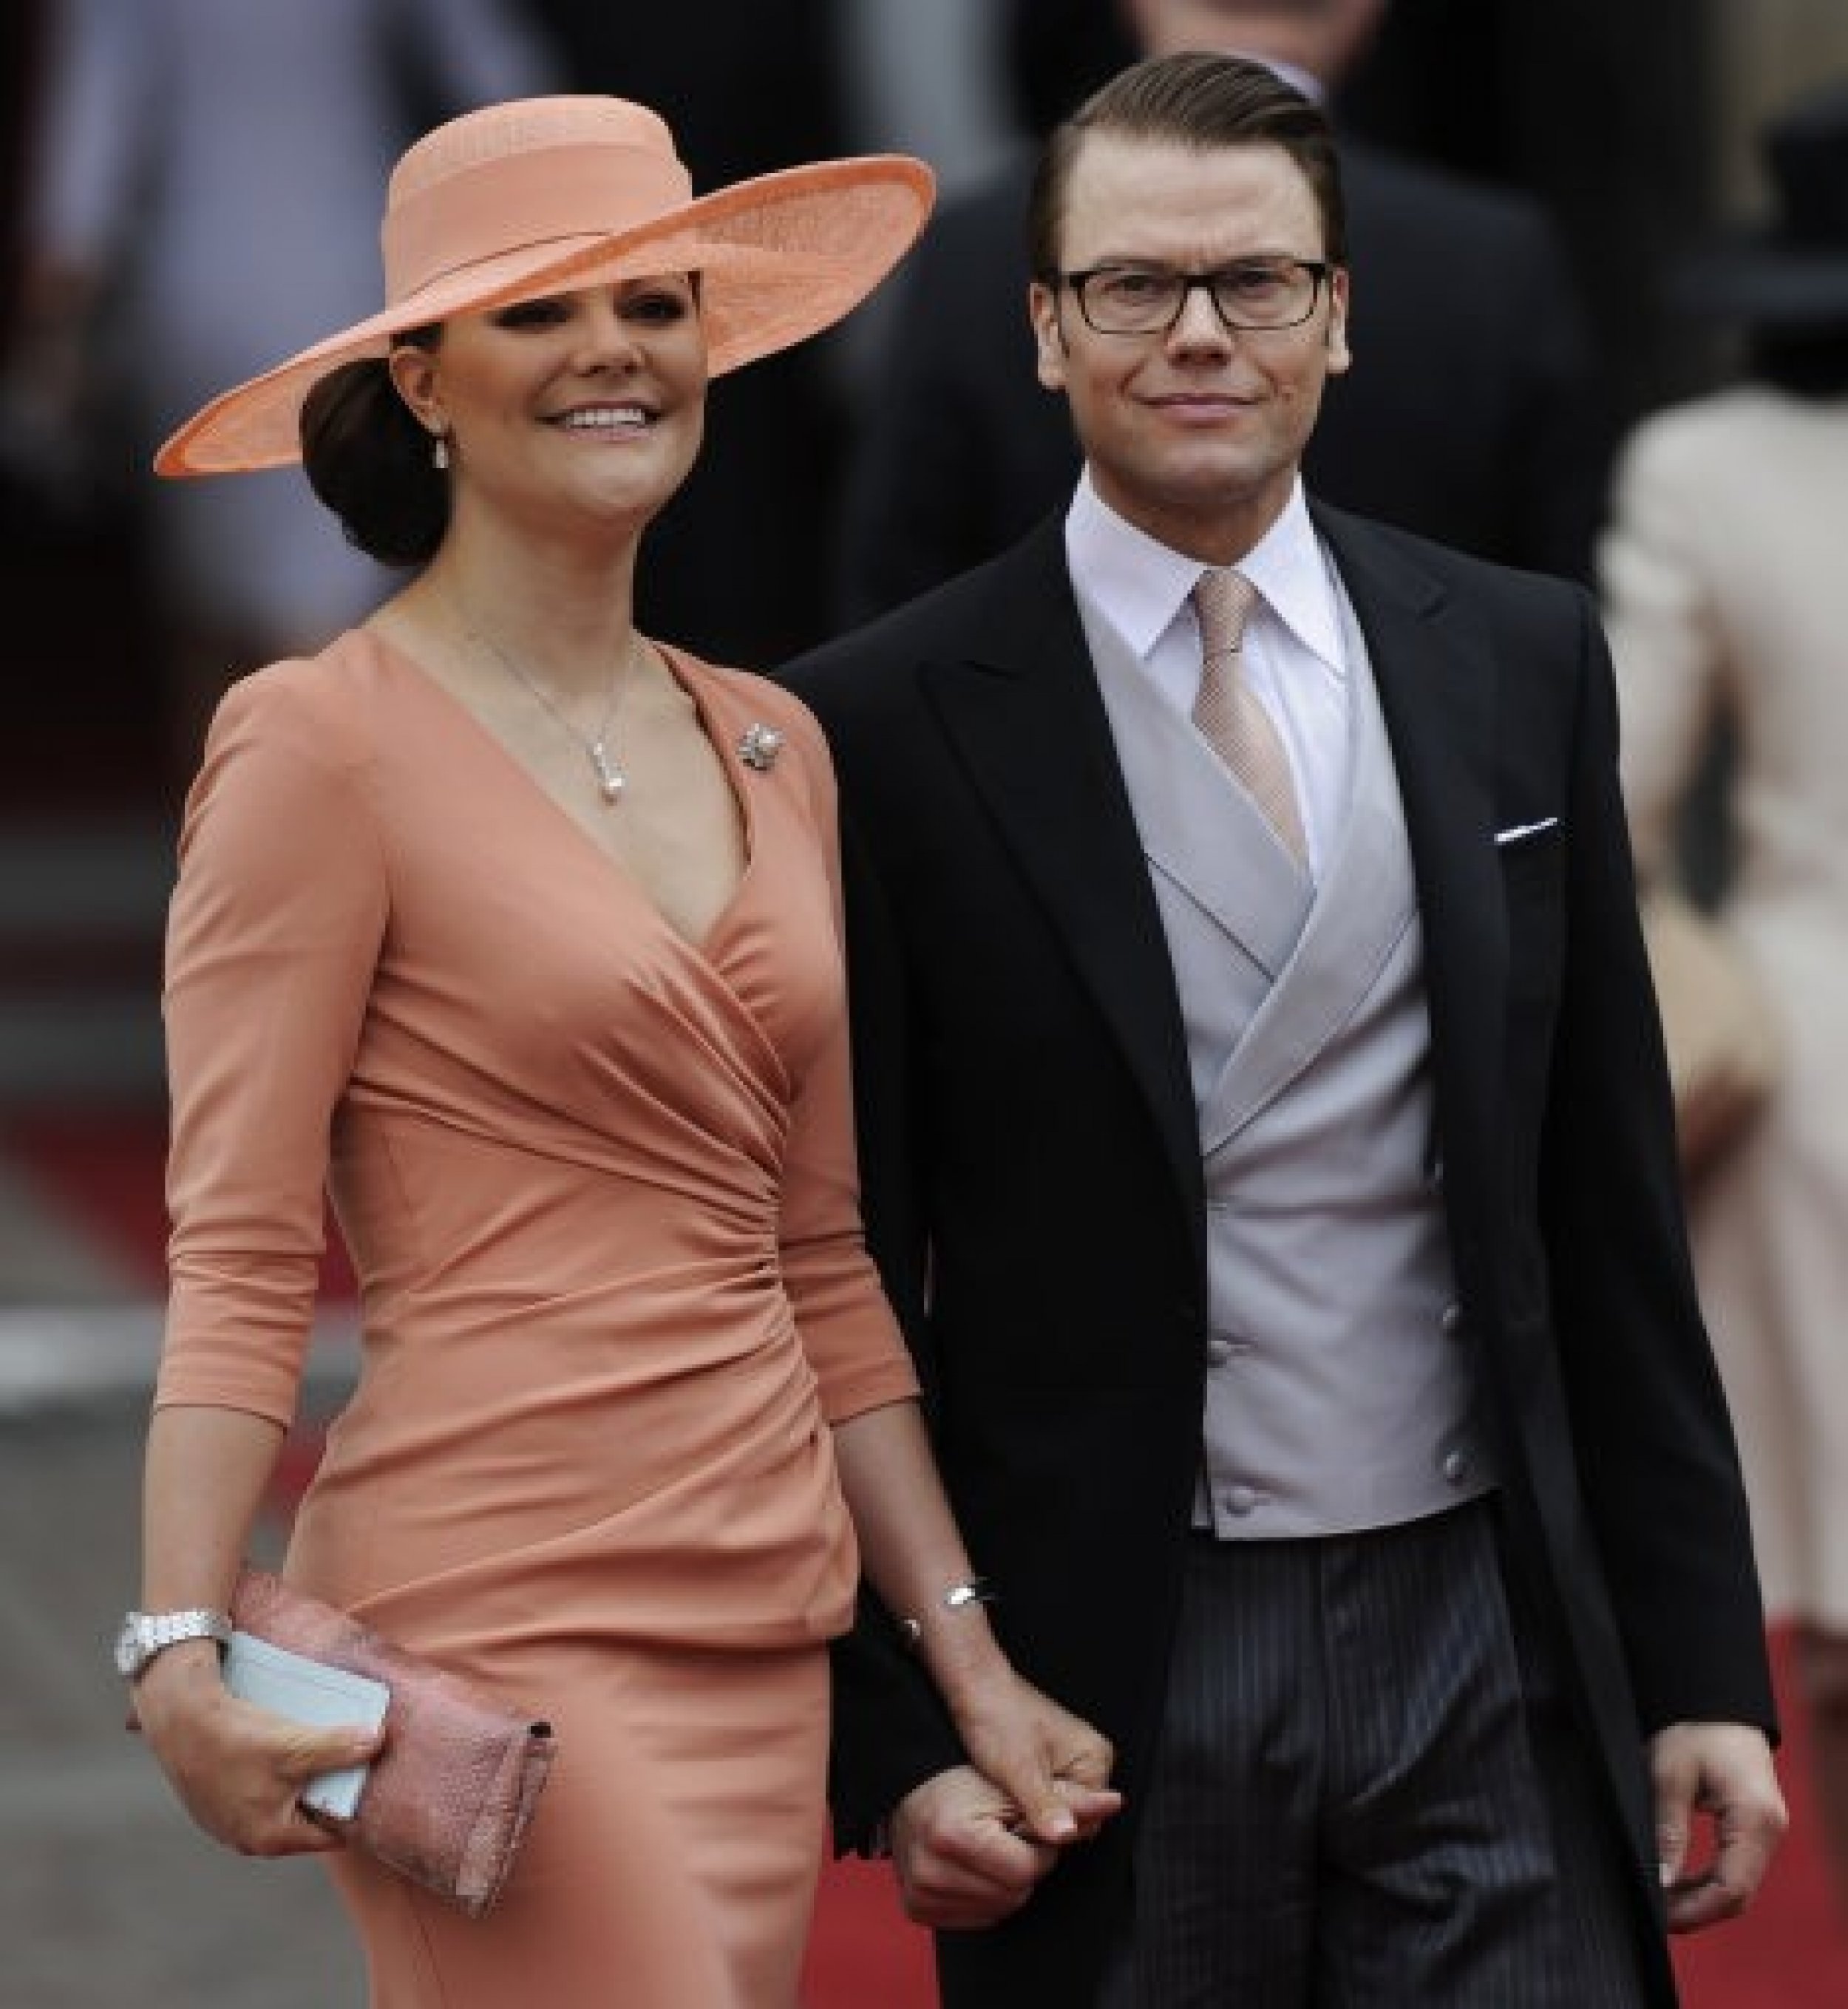 Princess Victoria of Sweden Gives Birth to Baby Girl